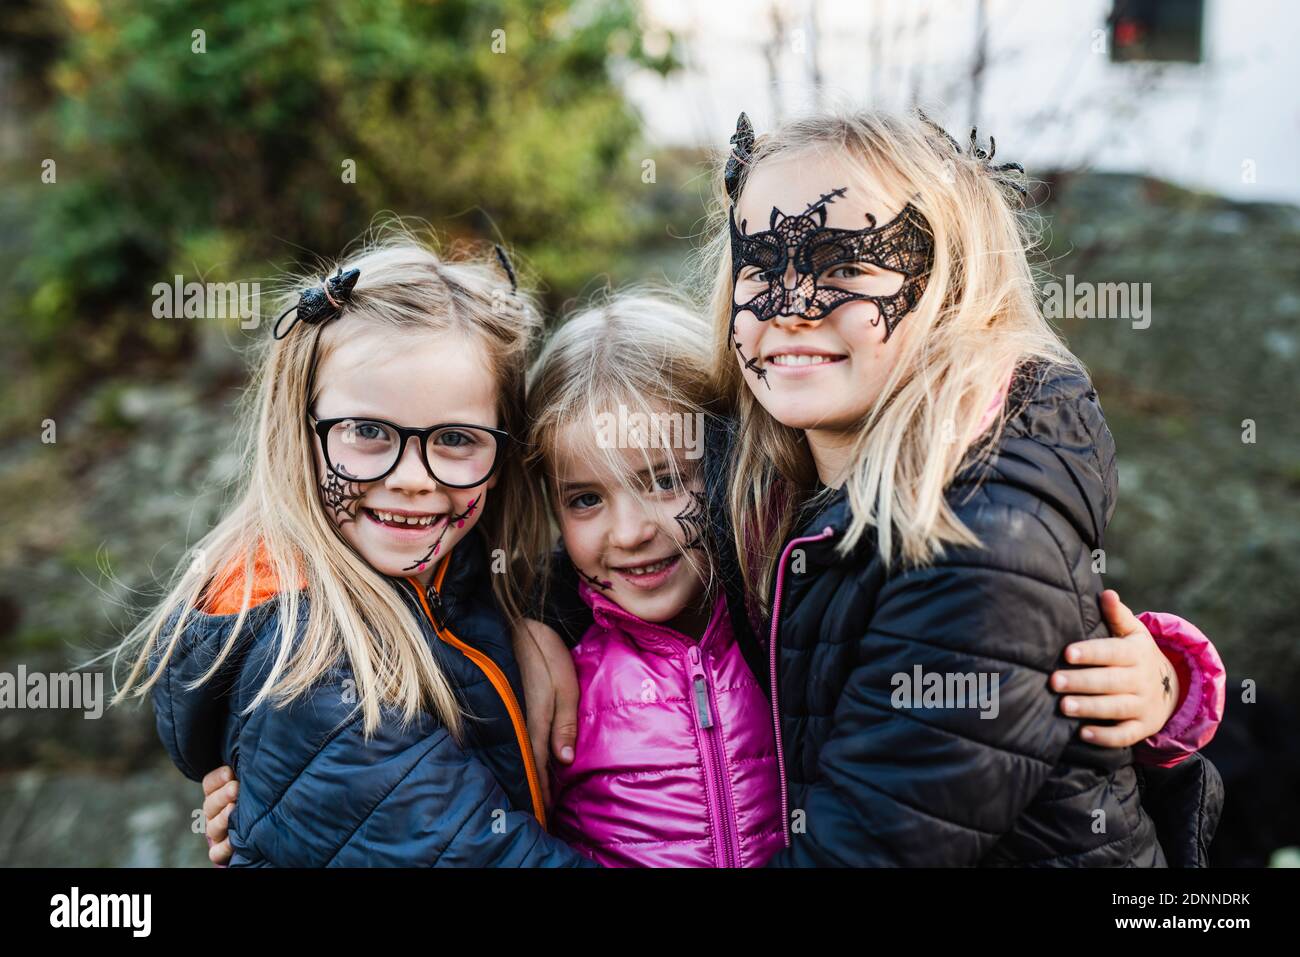 Smiling girls ready for Halloween Stock Photo